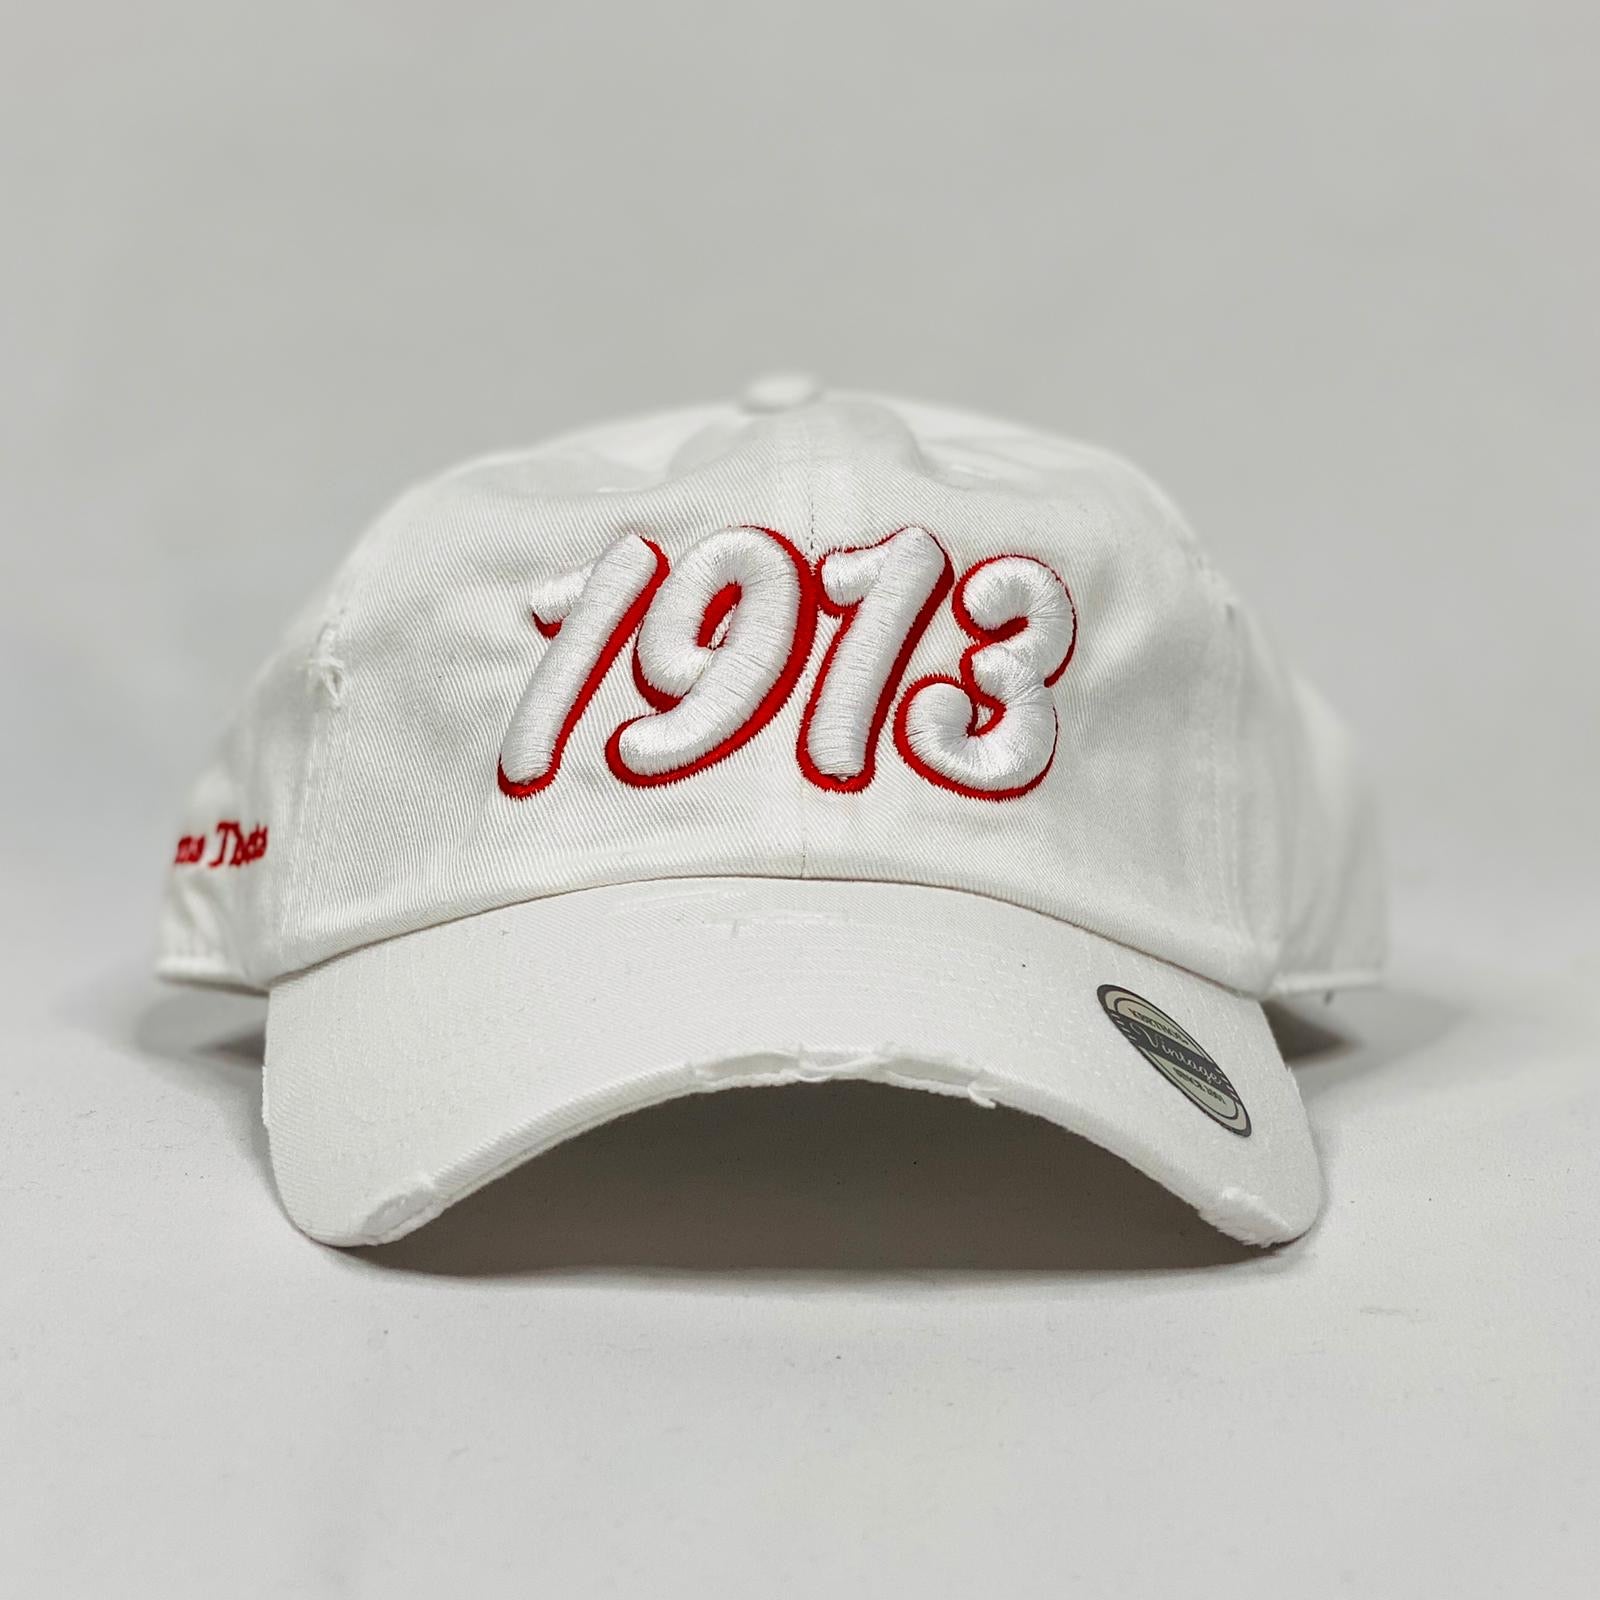 Delta Sigma Theta 1913 White Hat – The King McNeal Collection